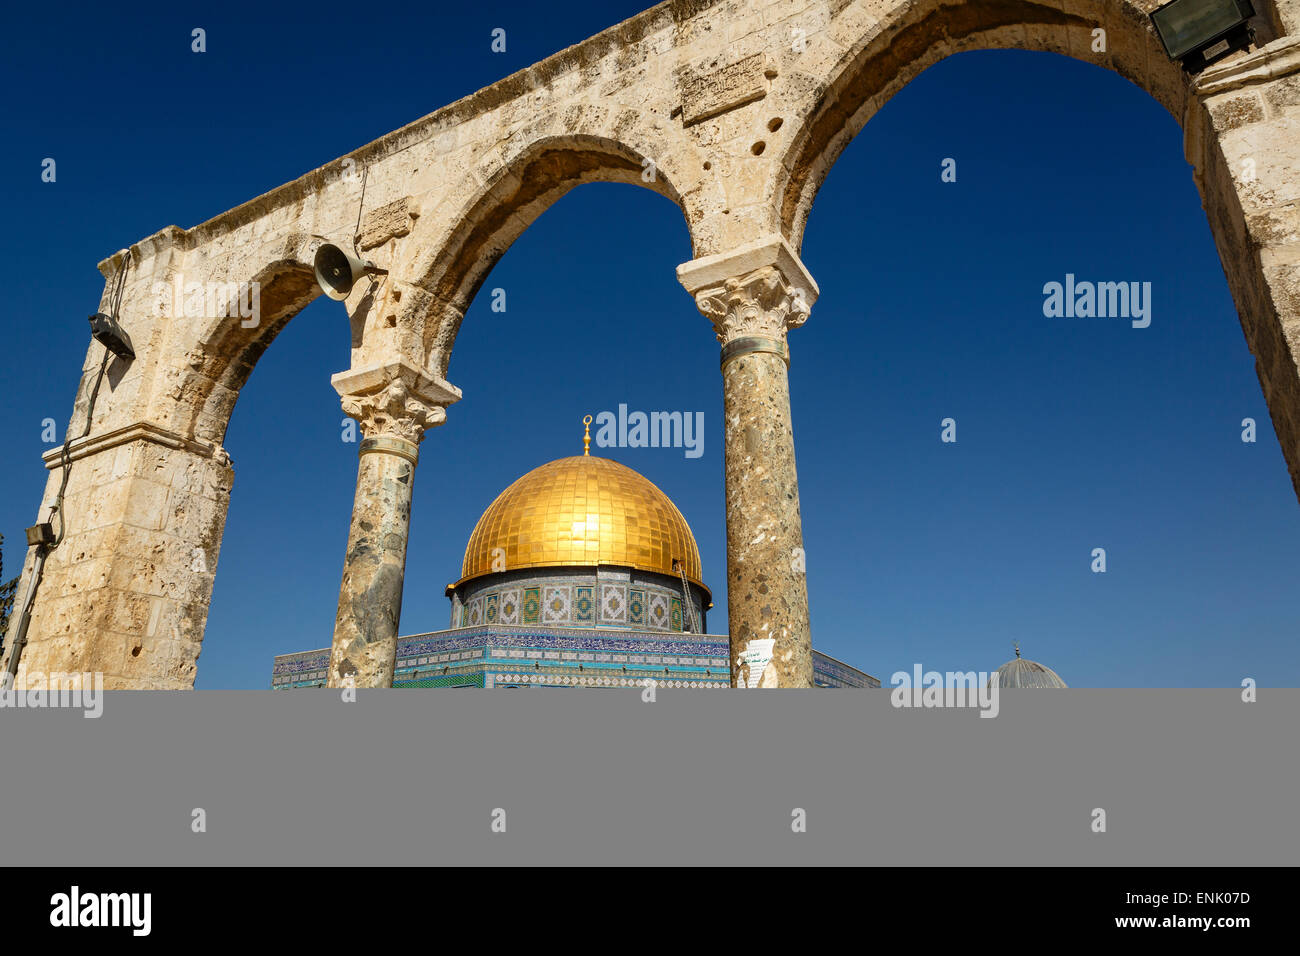 Dome of the Rock Mosque, Temple Mount, UNESCO World Heritage Site, Jerusalem, Israel, Middle East Stock Photo